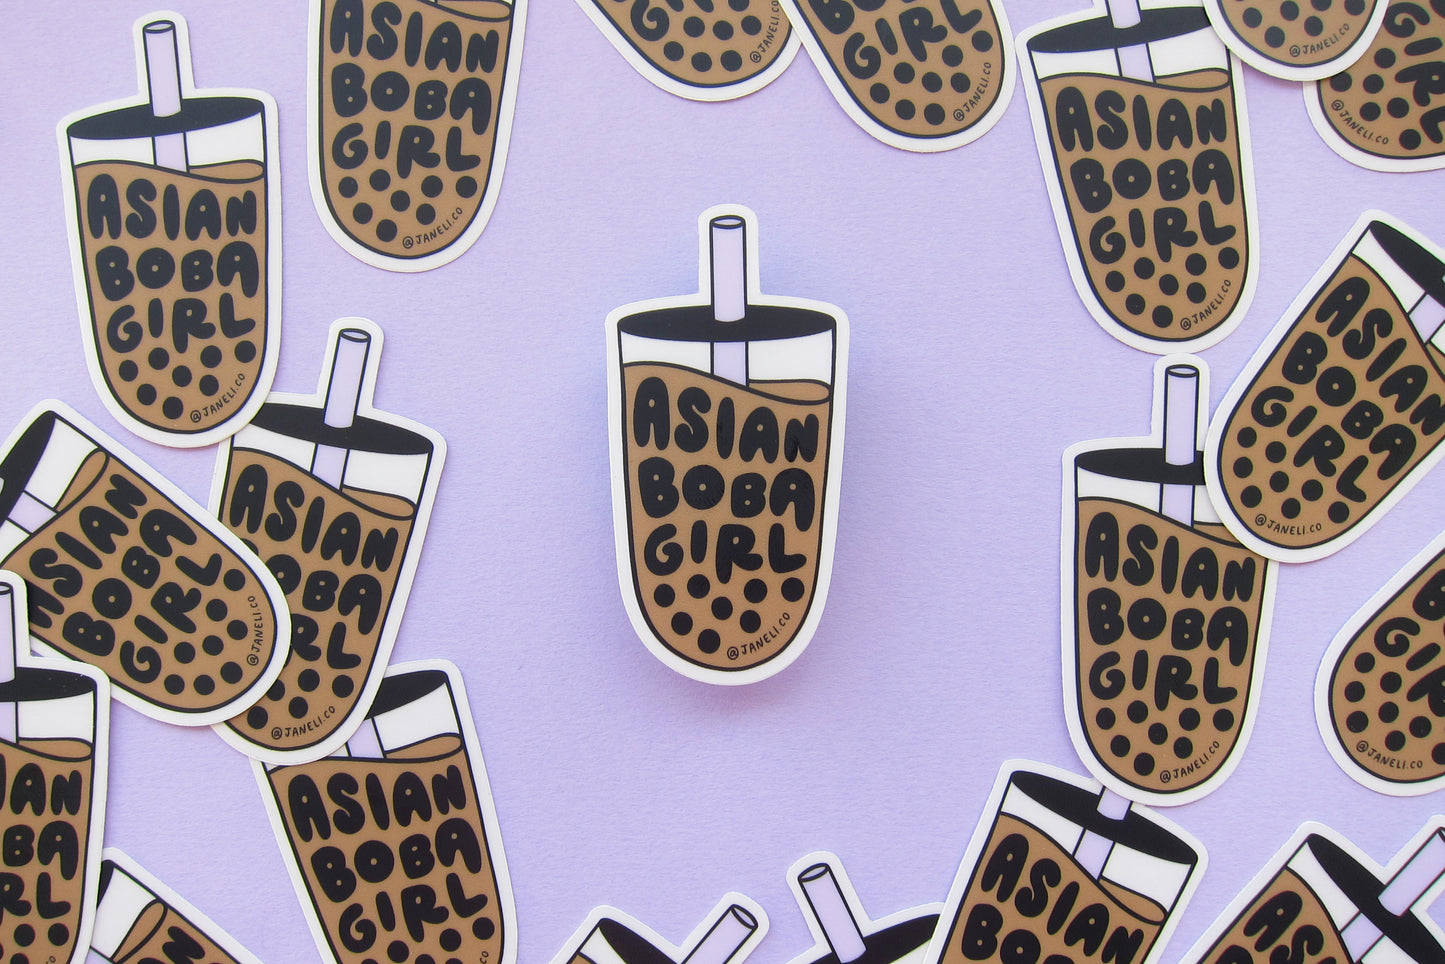 A grid of JaneLi.Co stickers that say "Asian Boba Girl" in the shape of cups of boba over a lavender background. 